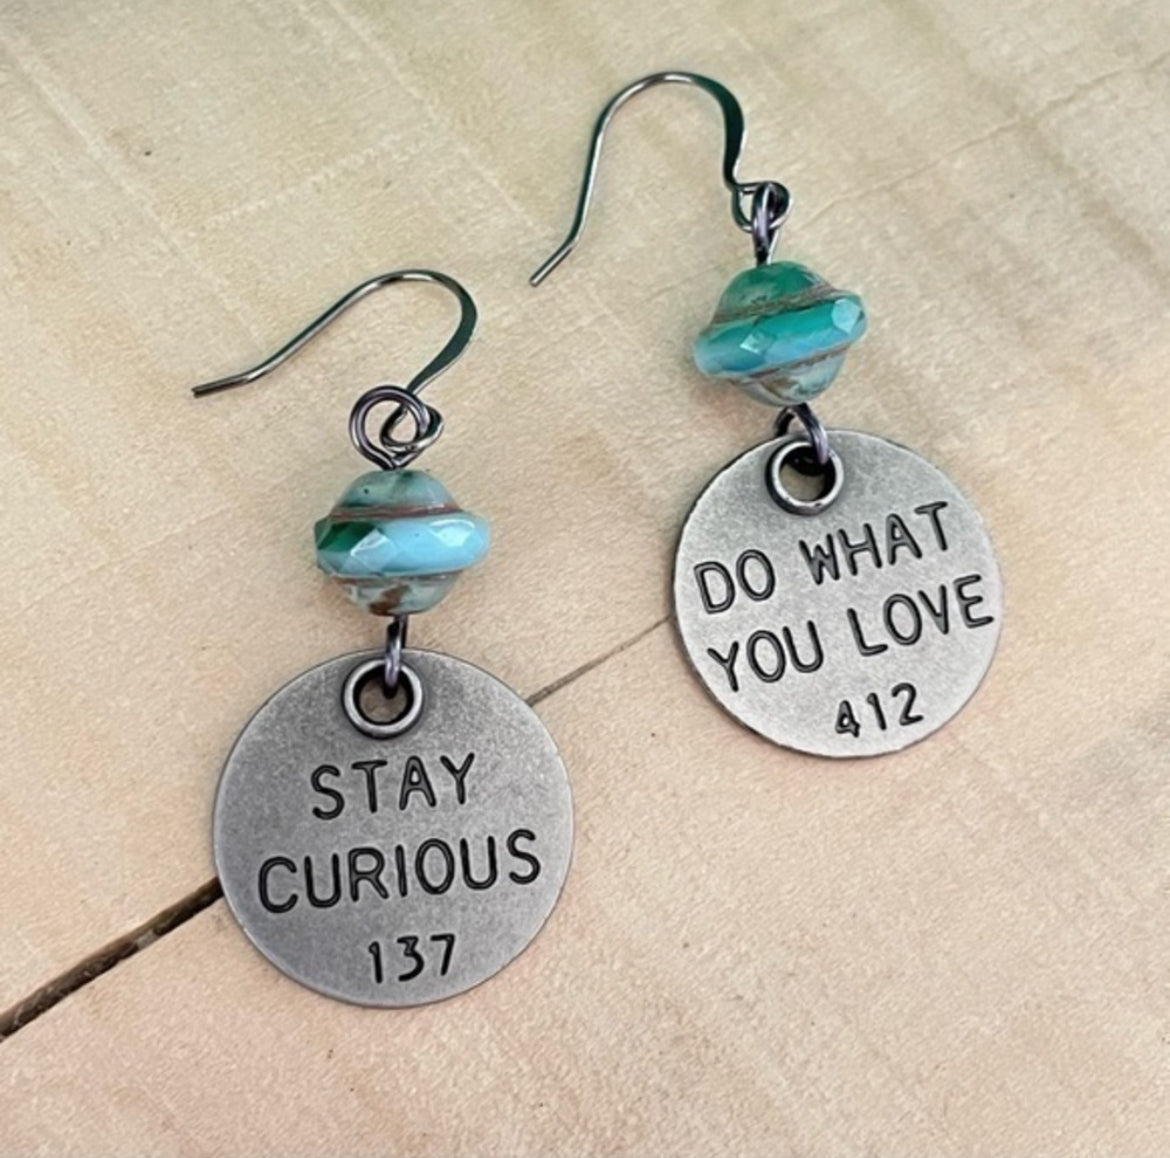 Handmade Mixed Stamped Metal Charm & Glass Bead Earrings Asymmetric Curious Love Inspiration Motivation Positive